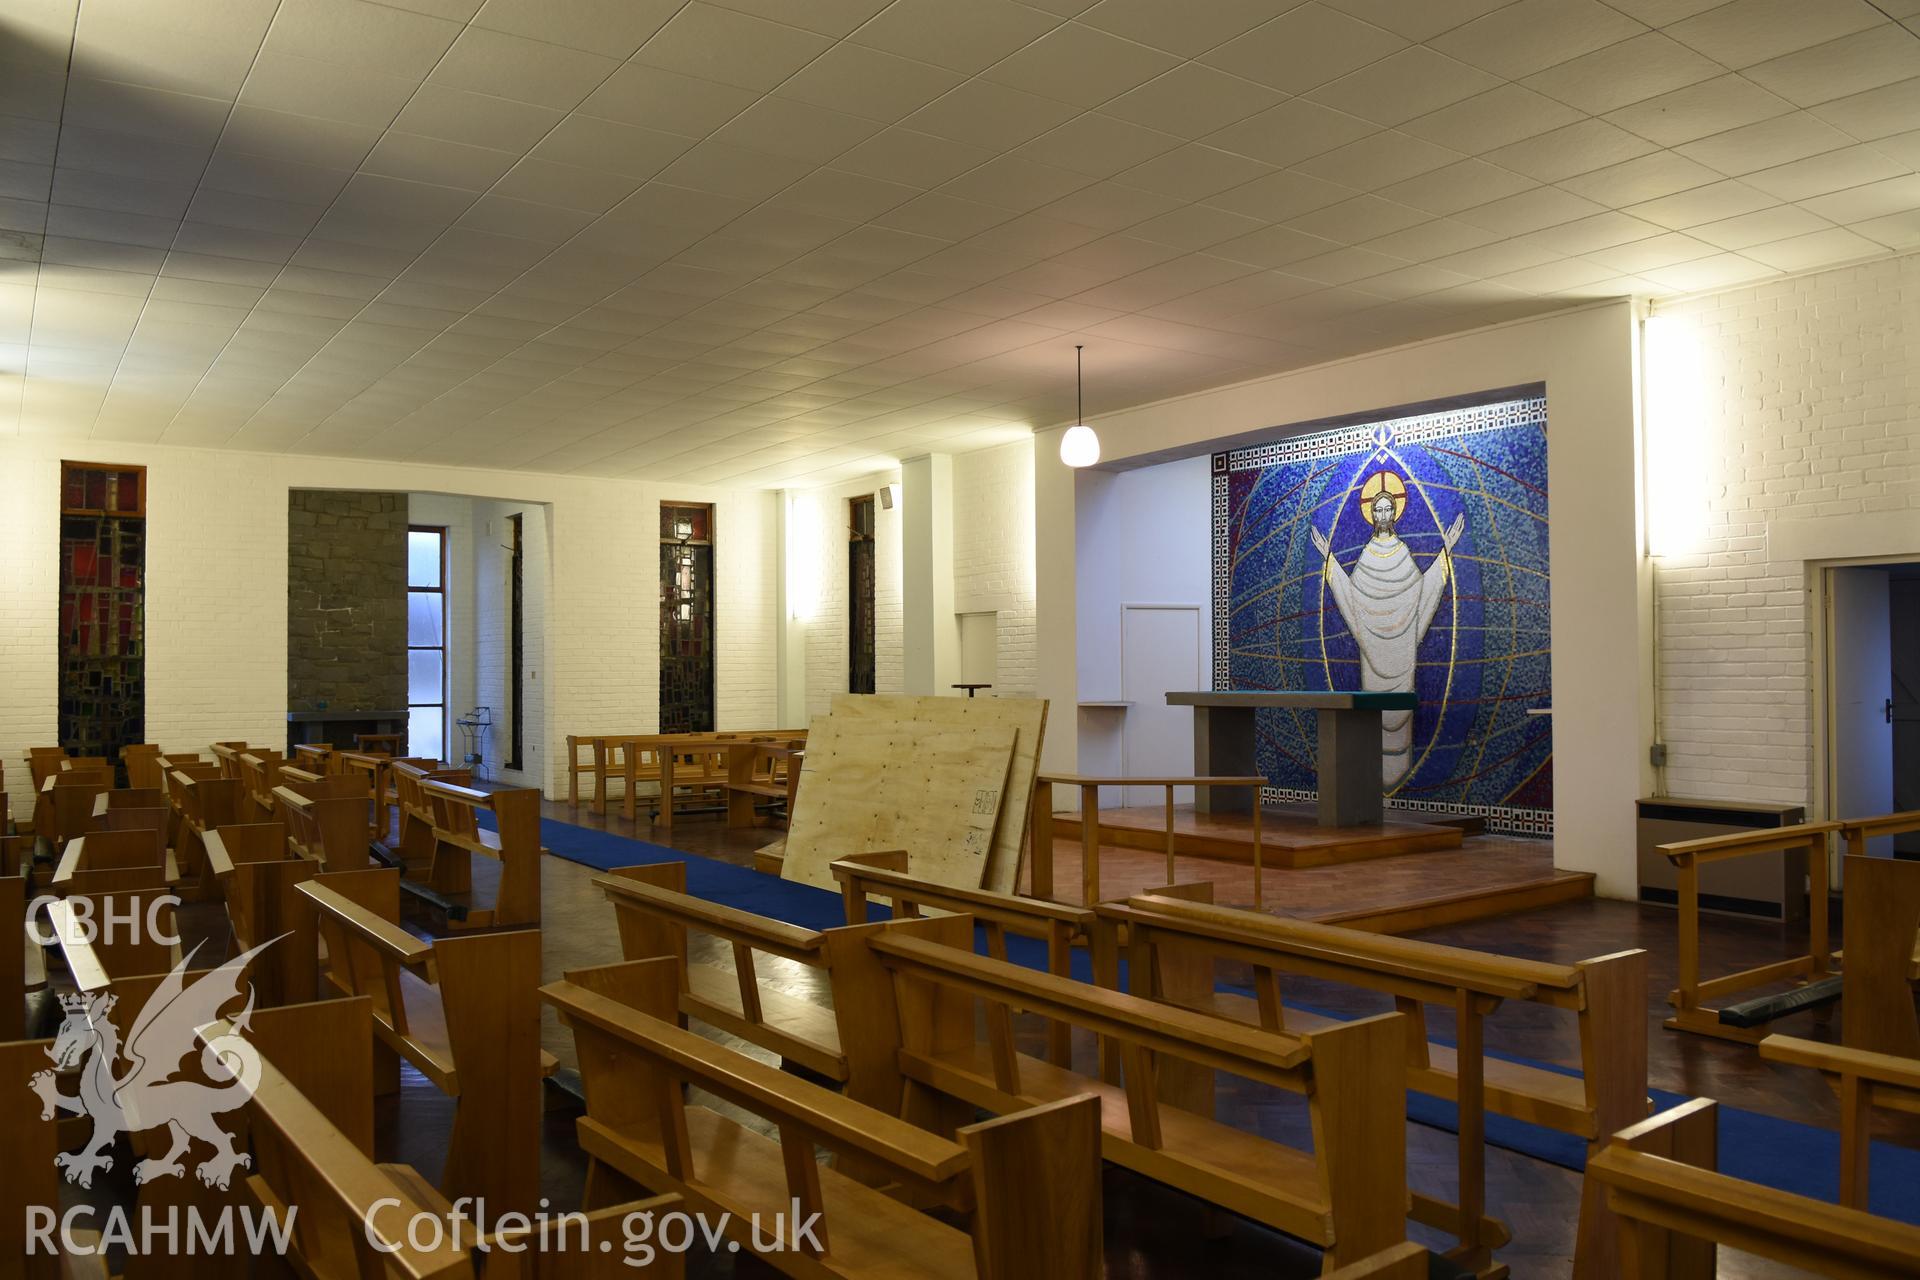 The Resurrection of Our Saviour Catholic Church, interior. Photographed by Sue Fielding on 11th January 2019.